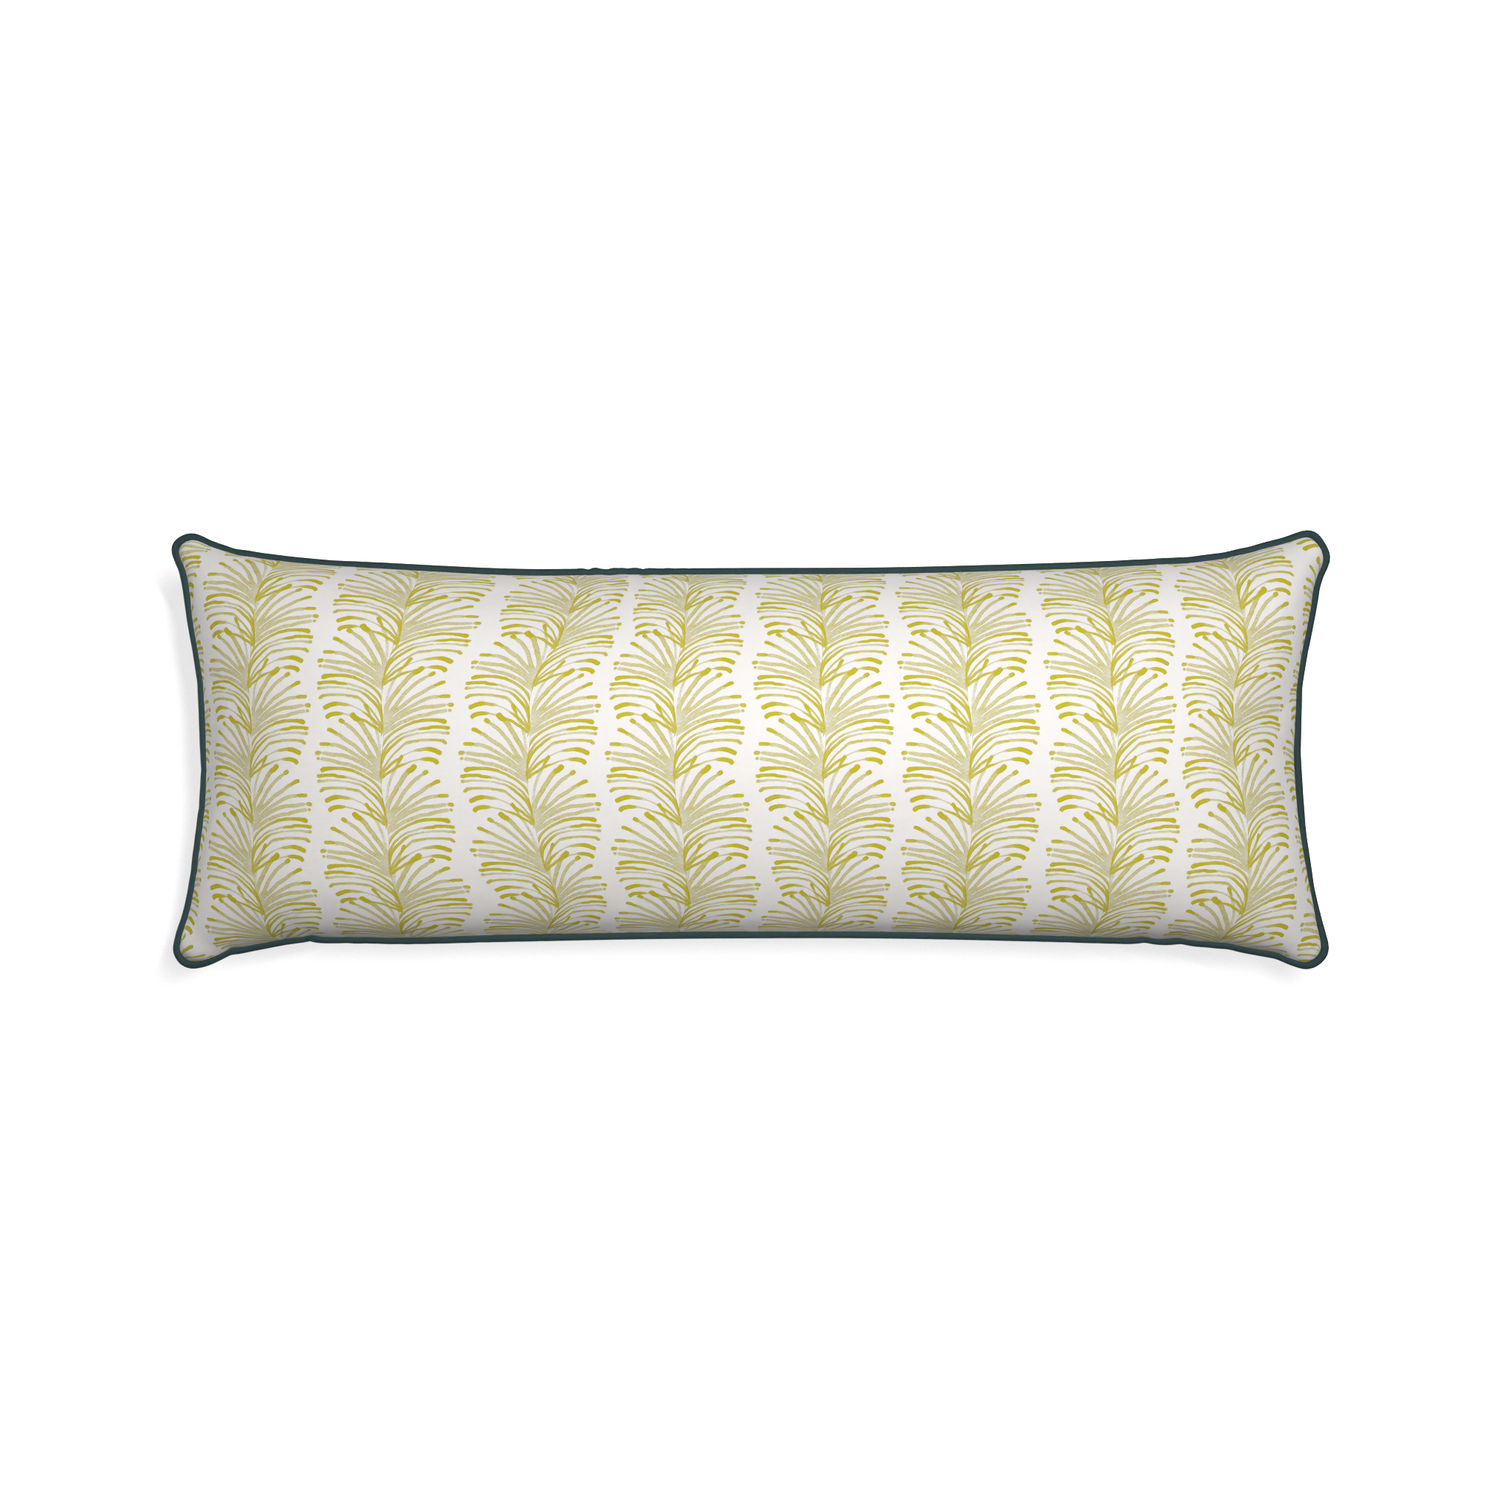 Xl-lumbar emma chartreuse custom yellow stripe chartreusepillow with p piping on white background